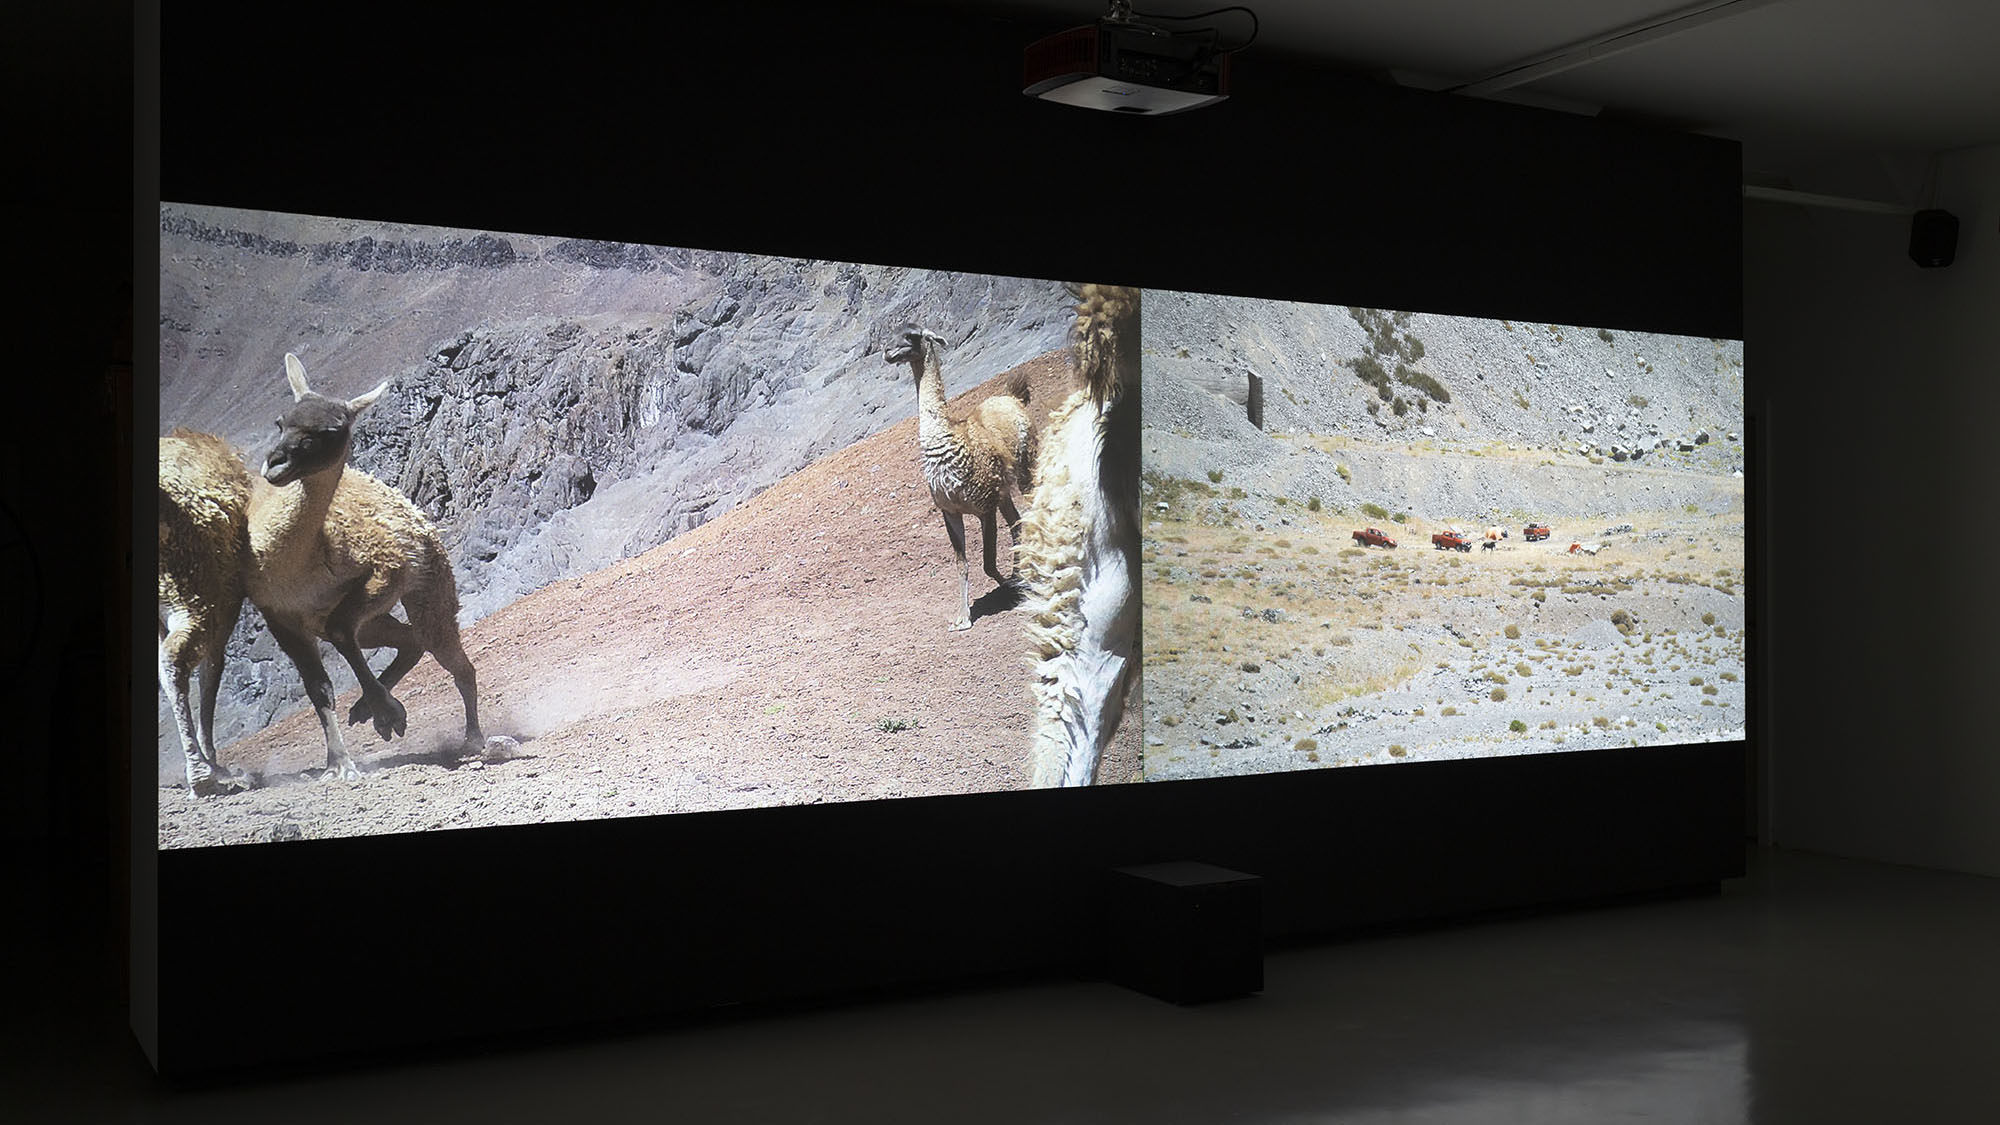 Installation view, MBAL, Le Locle, Switzerland. Image by Lucas Olivet.